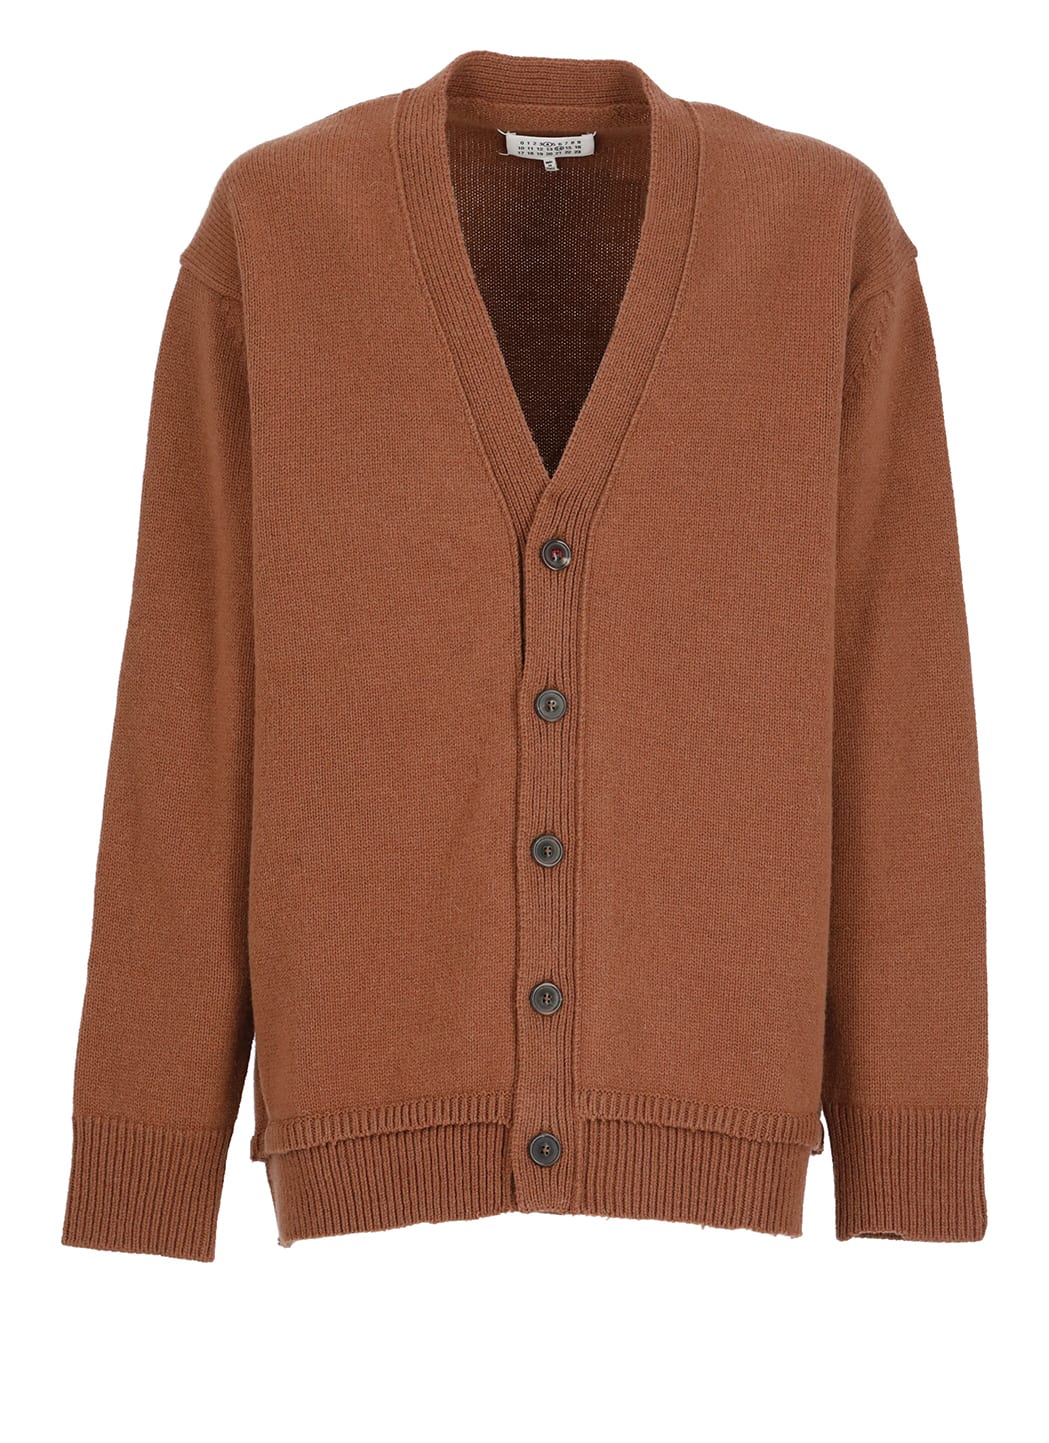 Wool, Linen And Cotton Cardigan